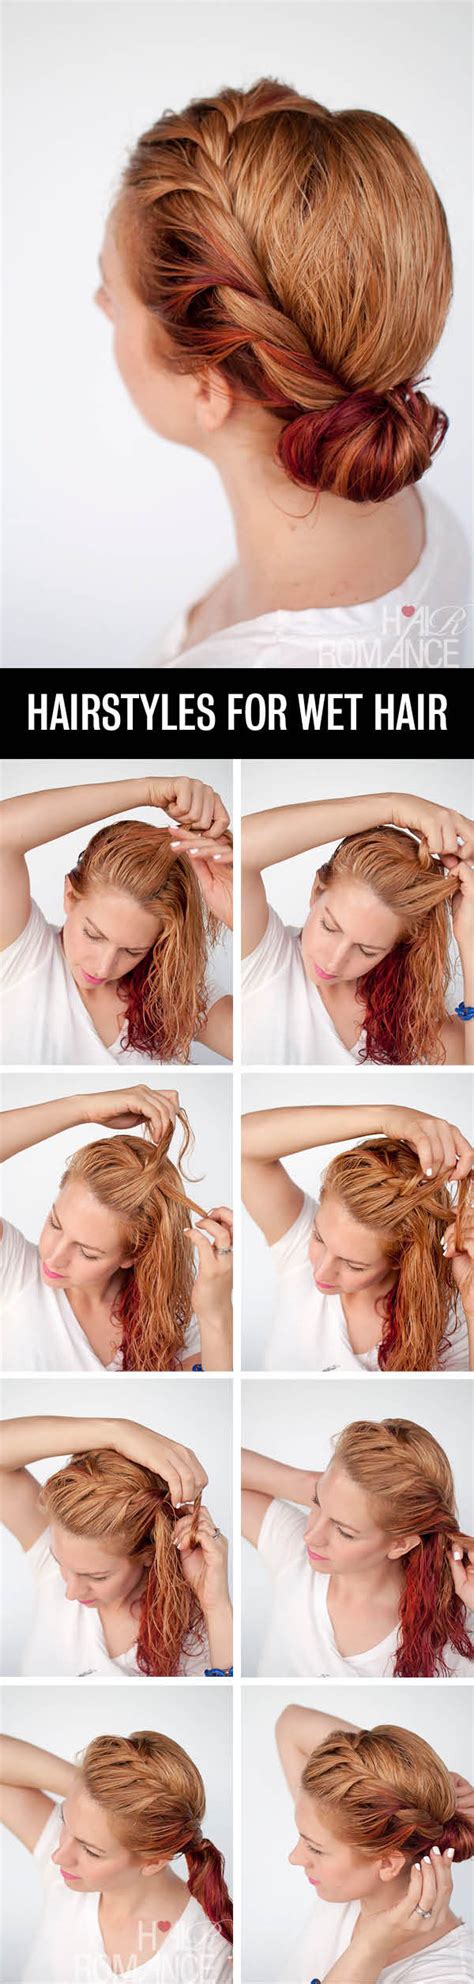 Get Ready Fast With 7 Easy Hairstyle Tutorials For Wet Hair Hair Romance